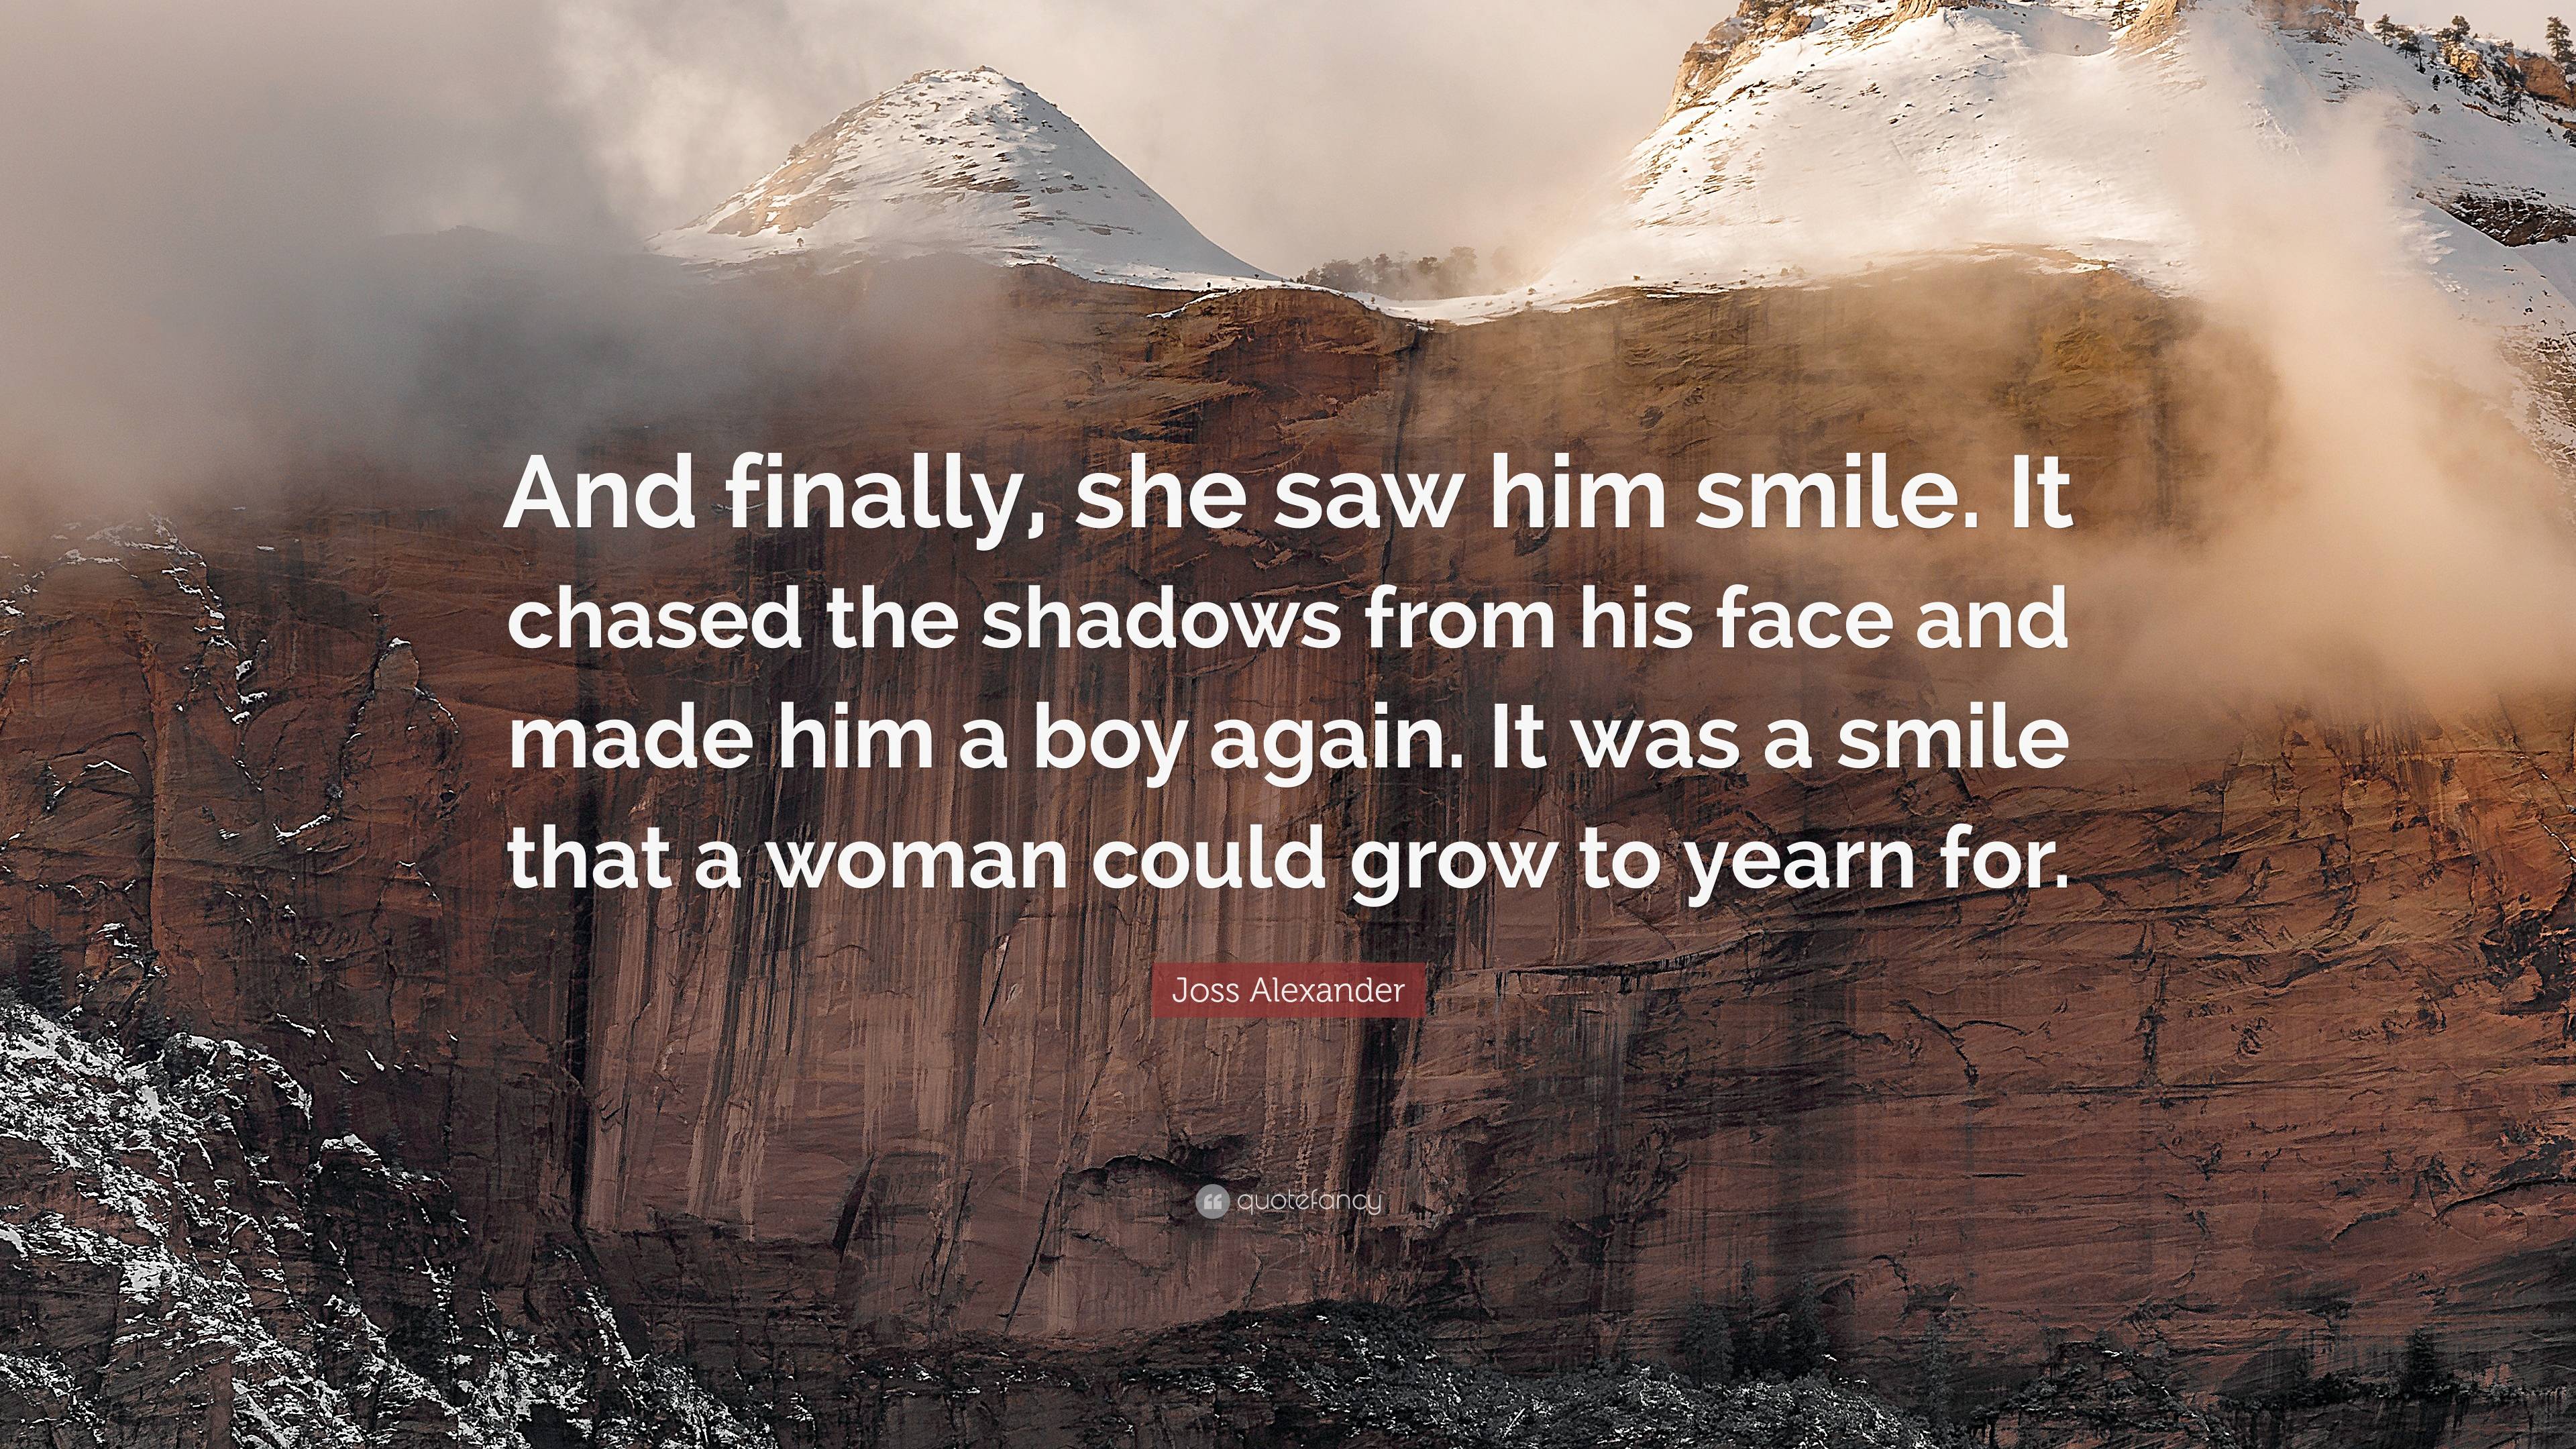 Joss Alexander Quote: “And finally, she saw him smile. It chased the ...